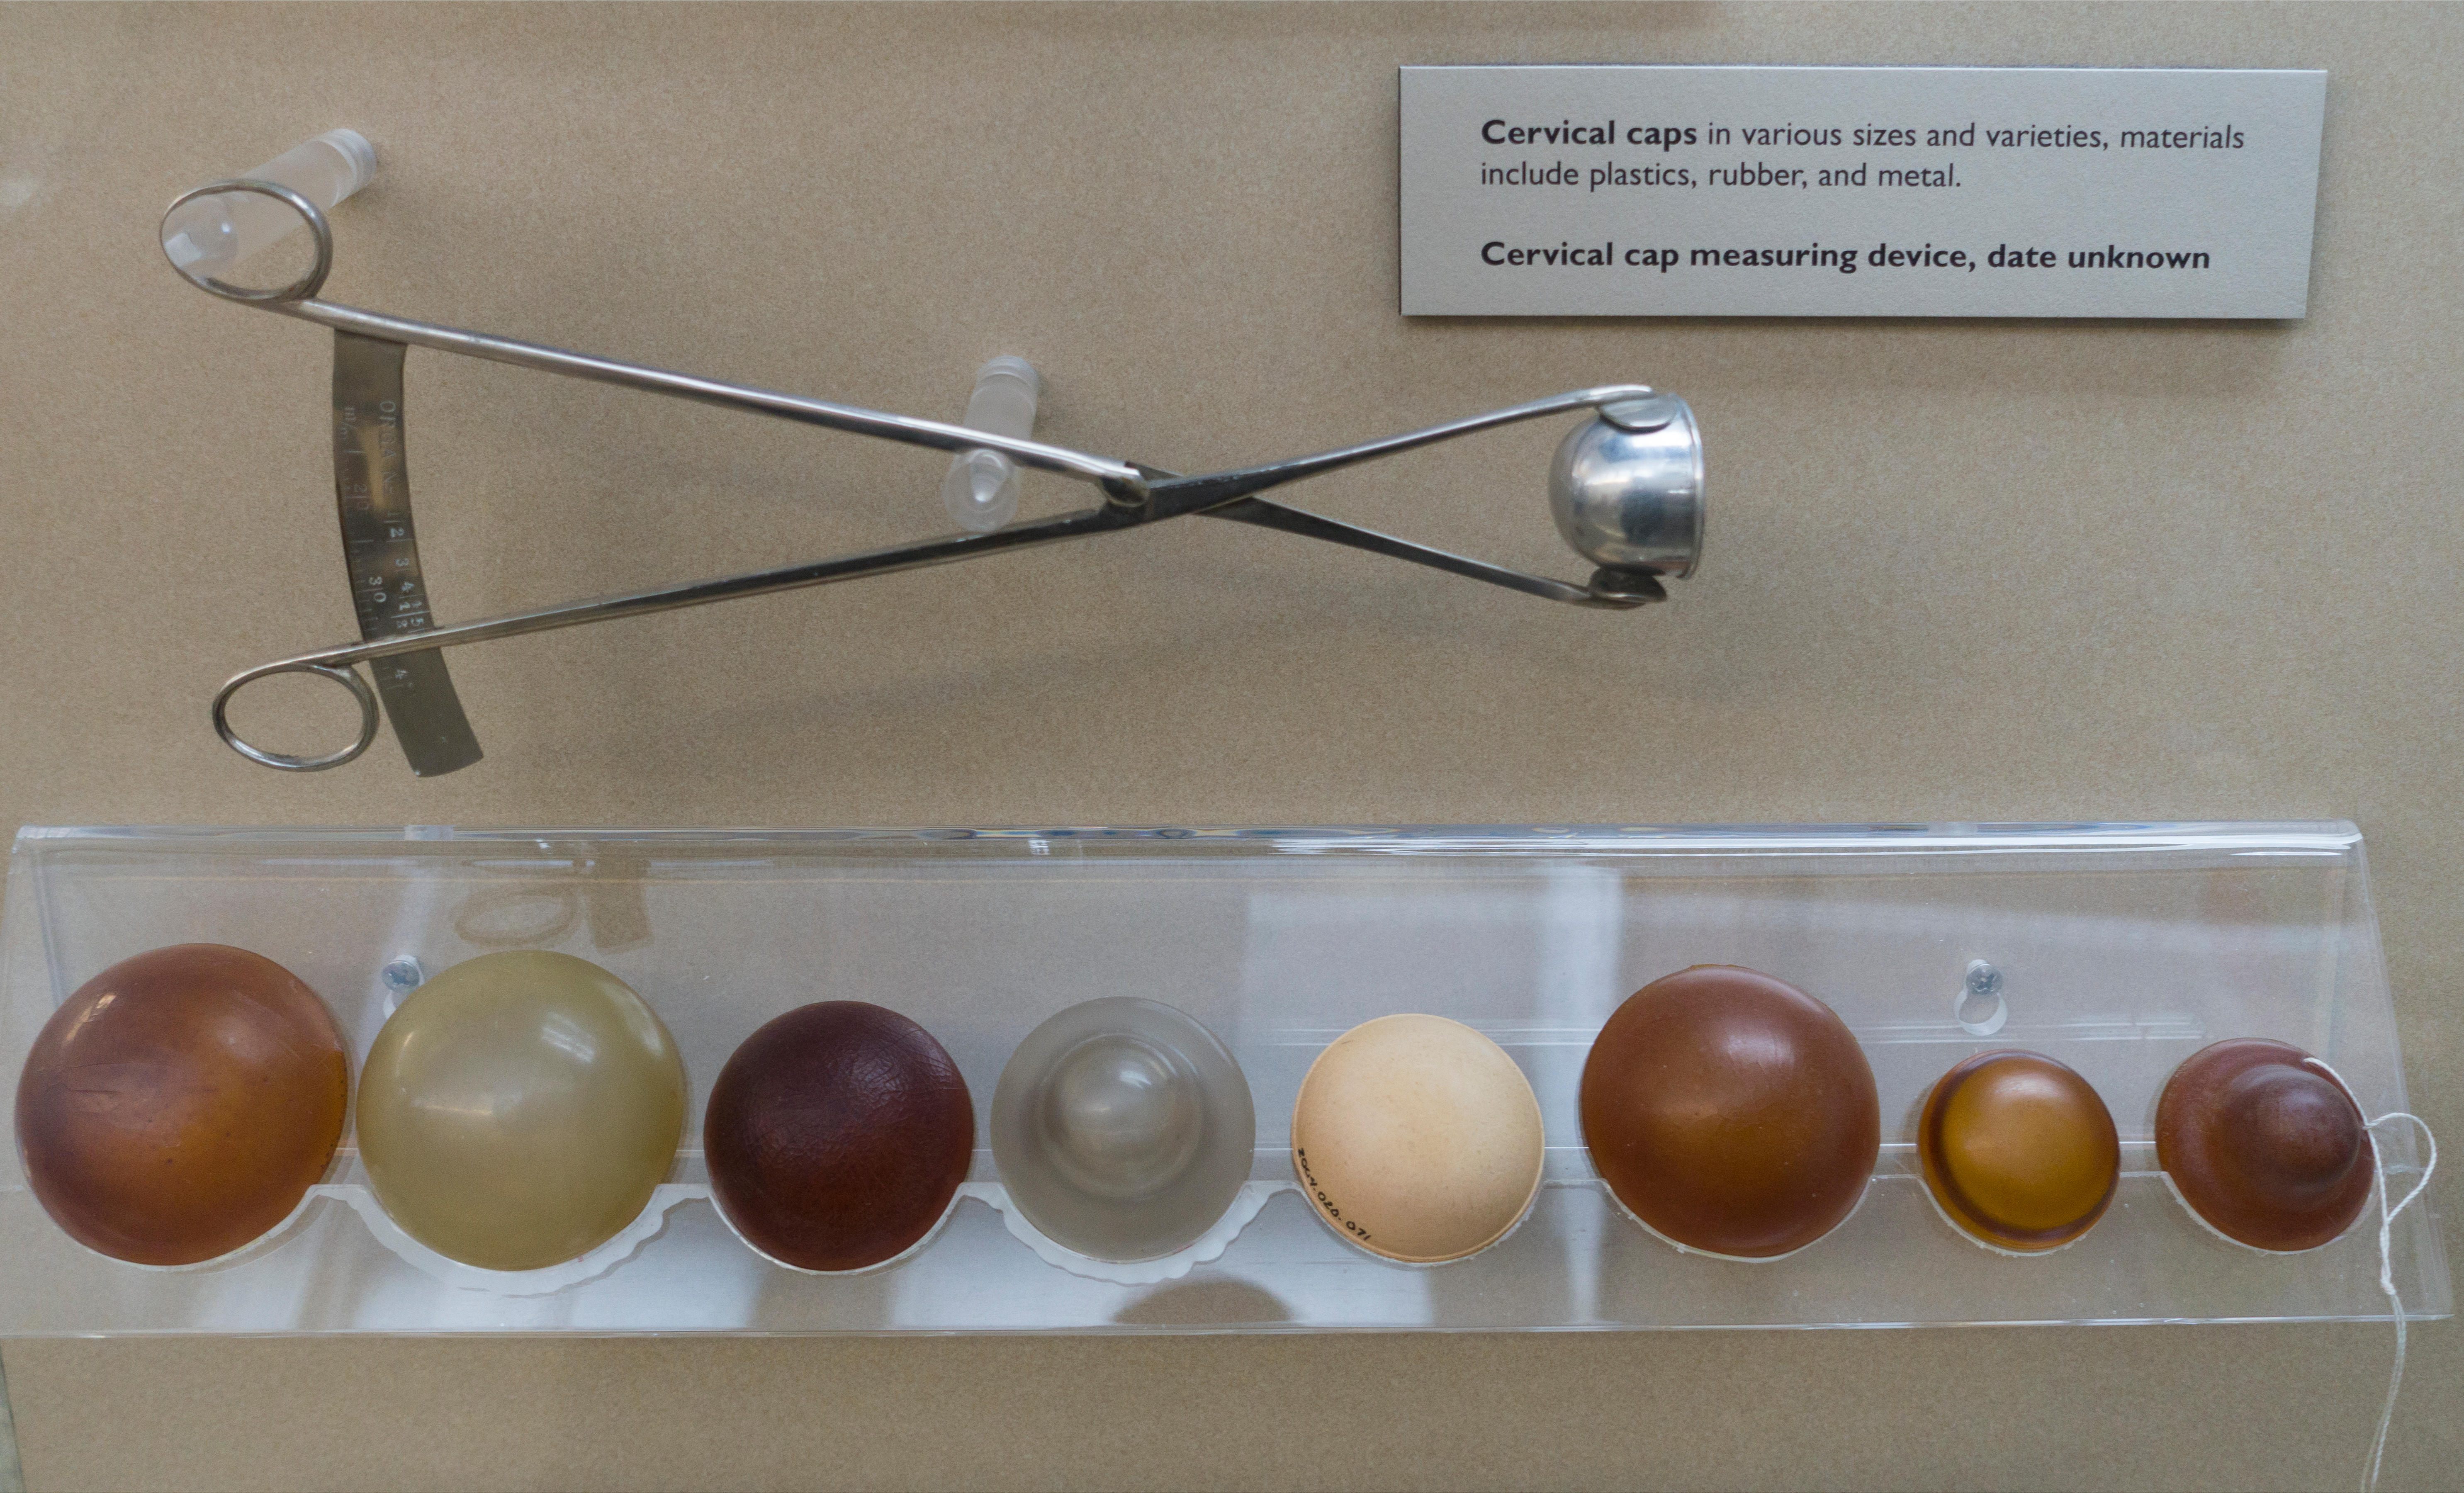 The Dittrick Museum of Medical History at Case Western Reserve University has some 1,100 historical birth control items in its collection, including these cervical caps, a form of contraception which became popular in the 1920s.